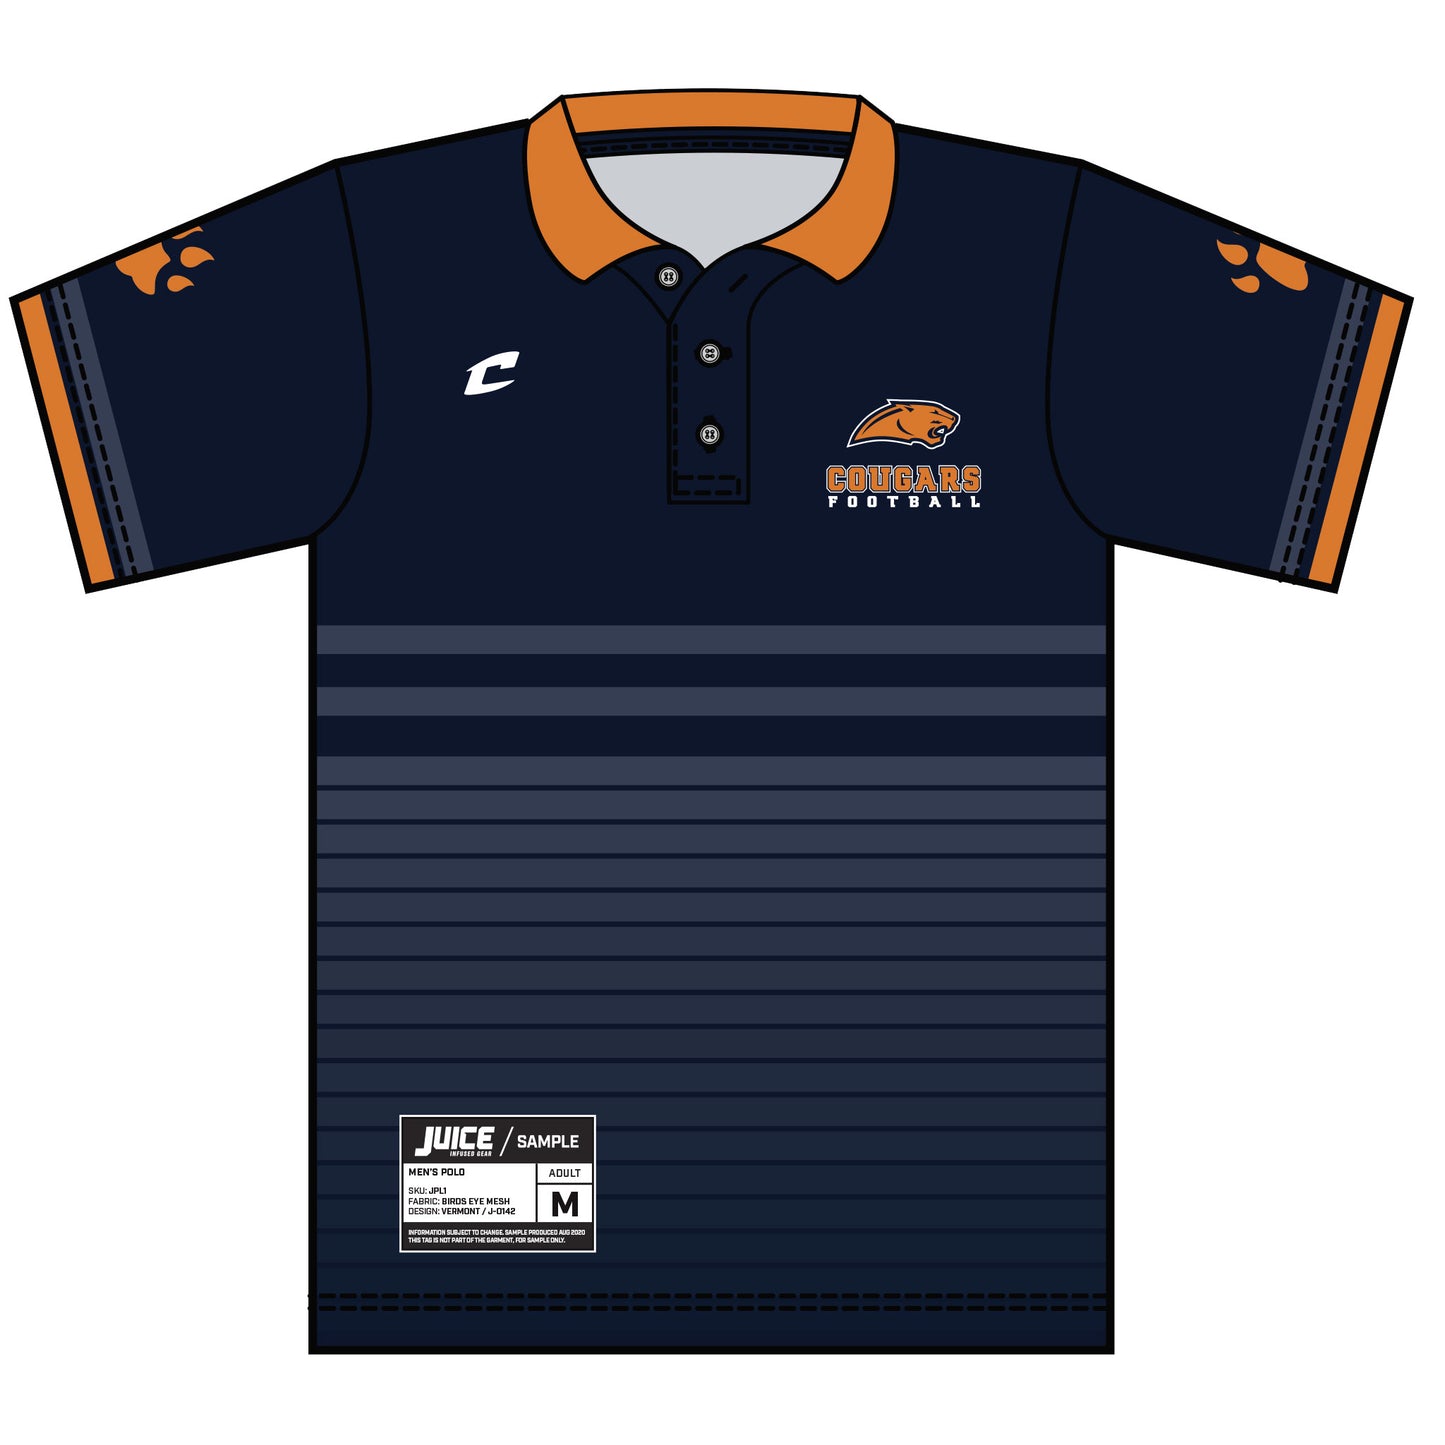 Champro Sublimated Polo